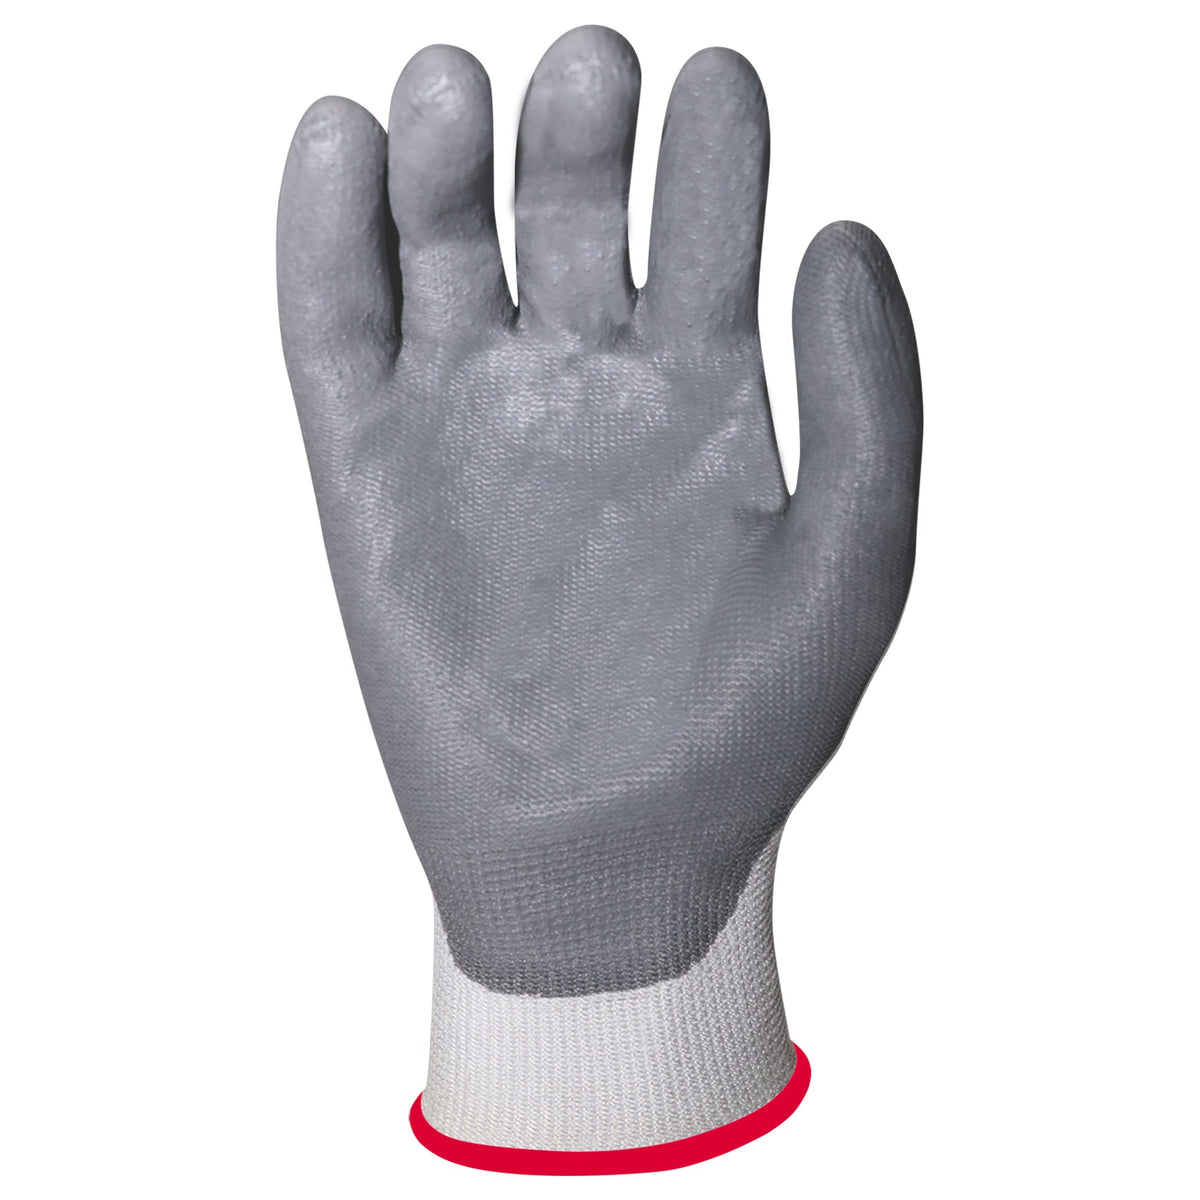 A2H-241 HPPE Cut Glove with PU Coating 12pair